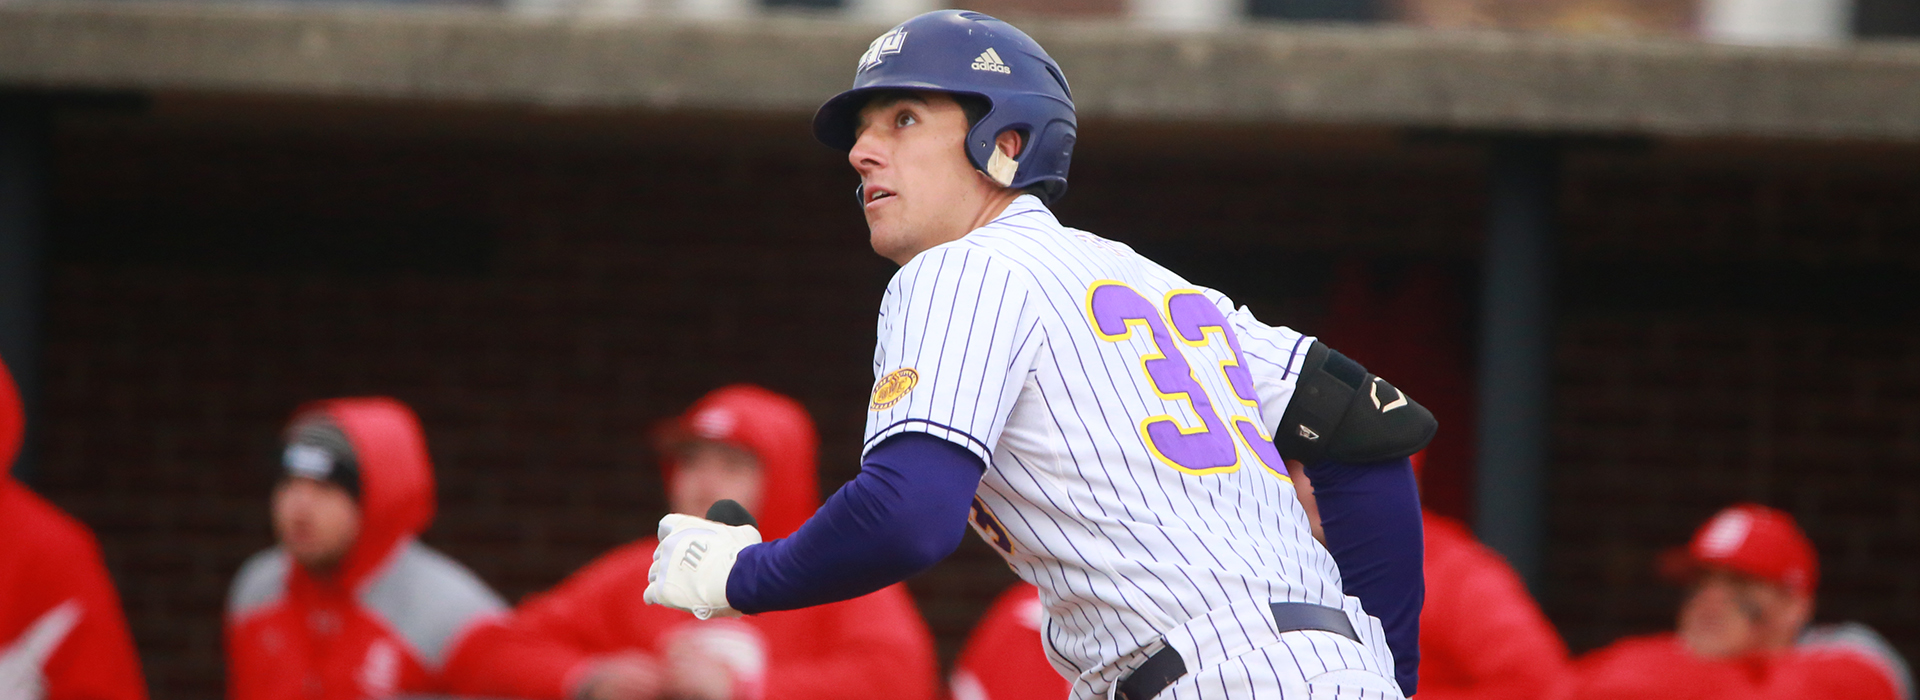 Golden Eagles dominate with bats, on mound in 8-1 victory at Belmont